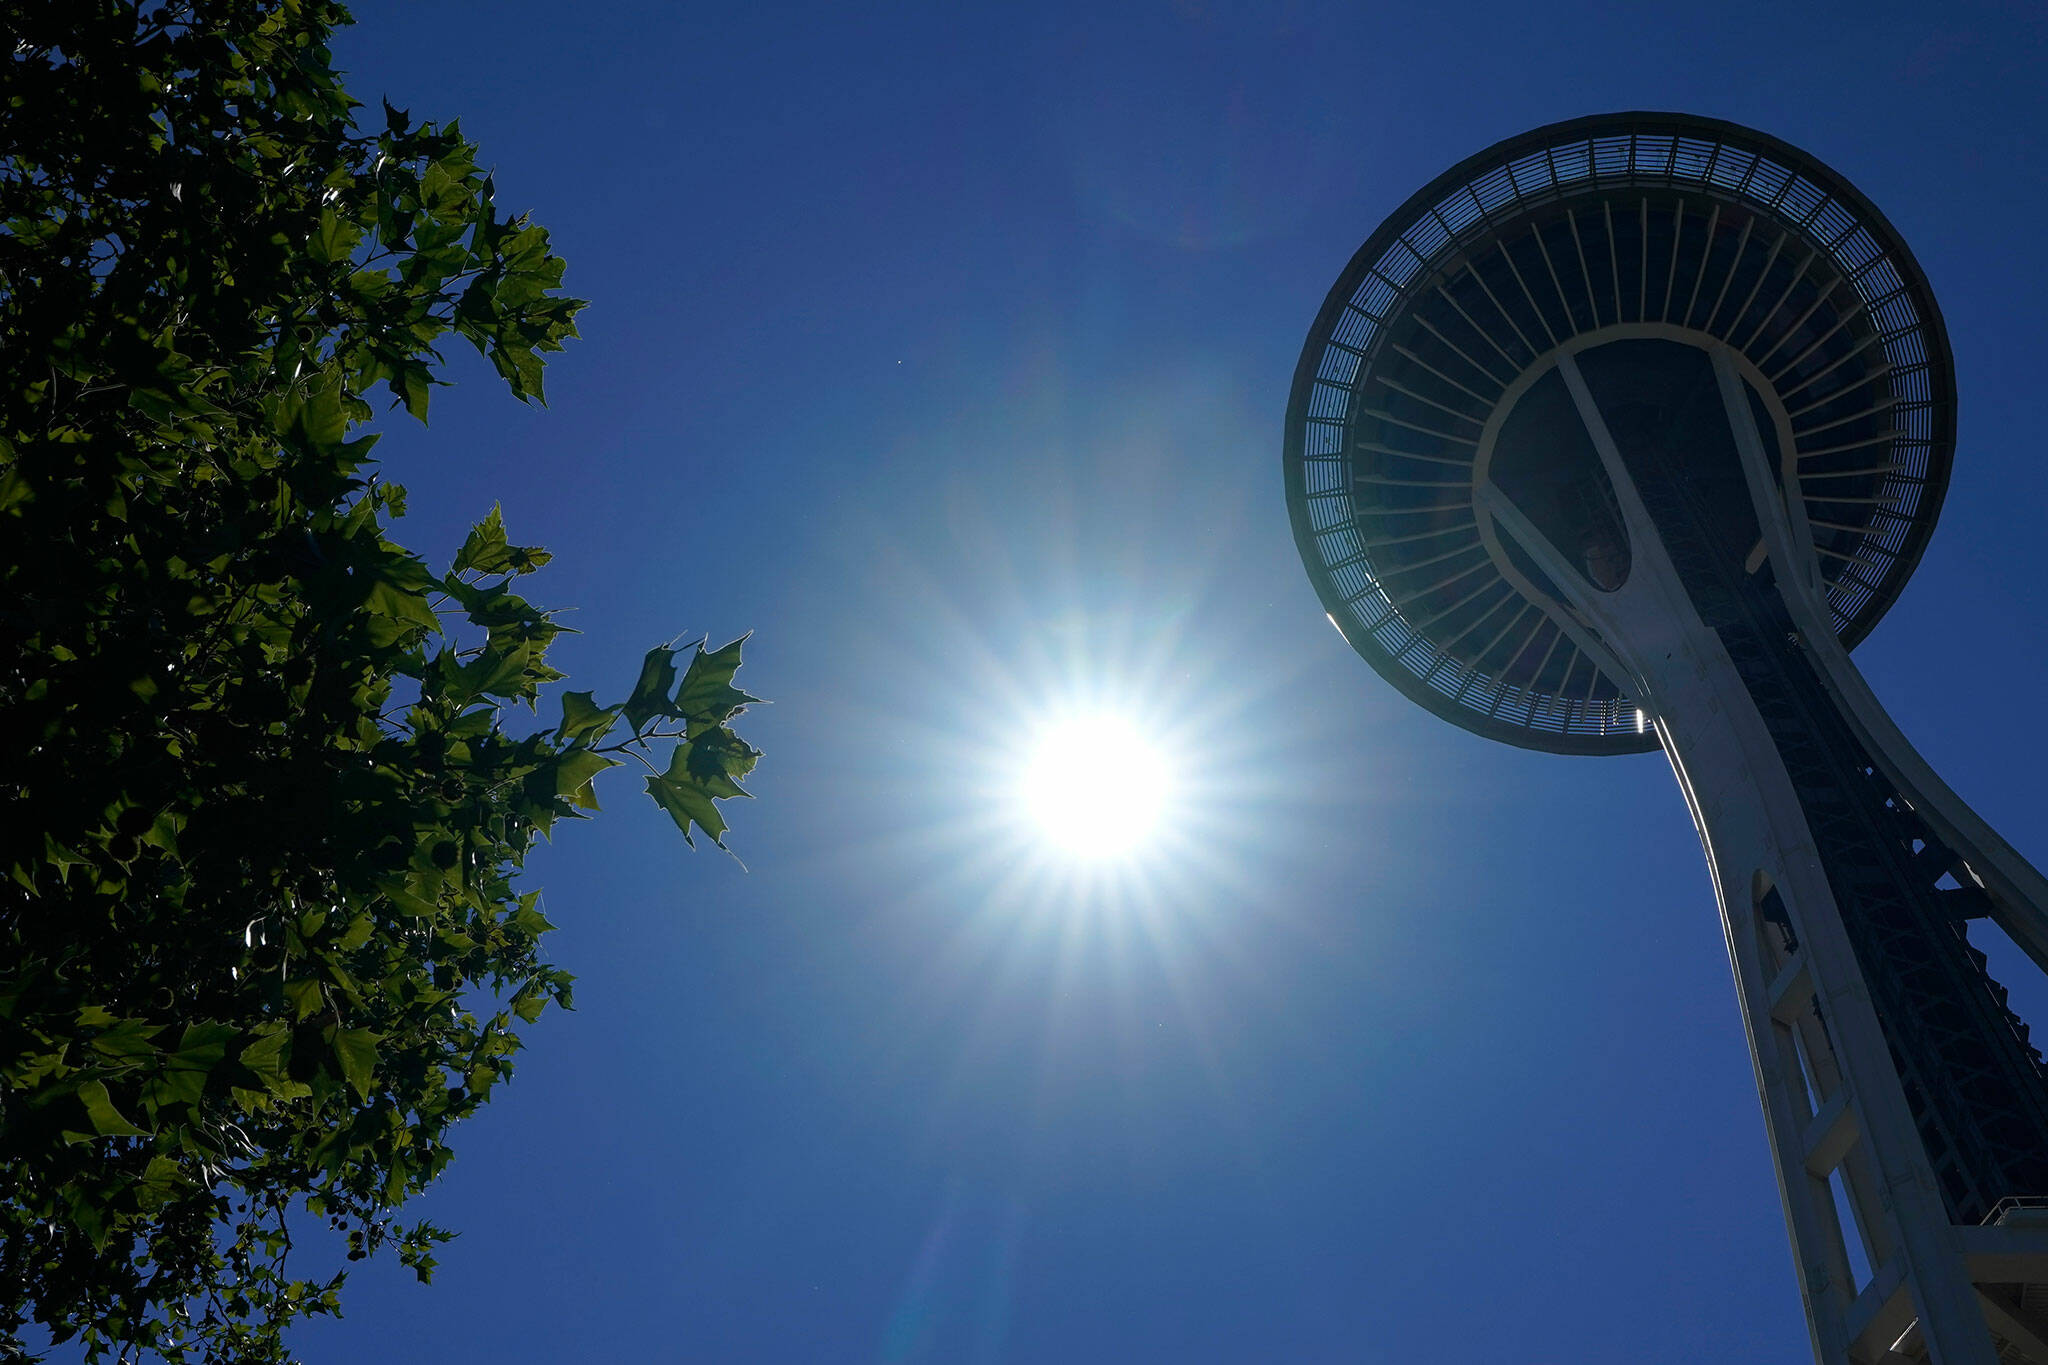 The sun shines near the Space Needle, June 28, 2021, in Seattle as Northwest cities broke all-time heat records, with temperatures soaring well above 100 degrees Fahrenheit. Weather extremes like this will increase in frequency and intensity in North America the coming years as global warming accelerates, according to a United Nations Intergovernmental Panel on Climate Change report released last week. (Ted S. Warren / Associated Press)